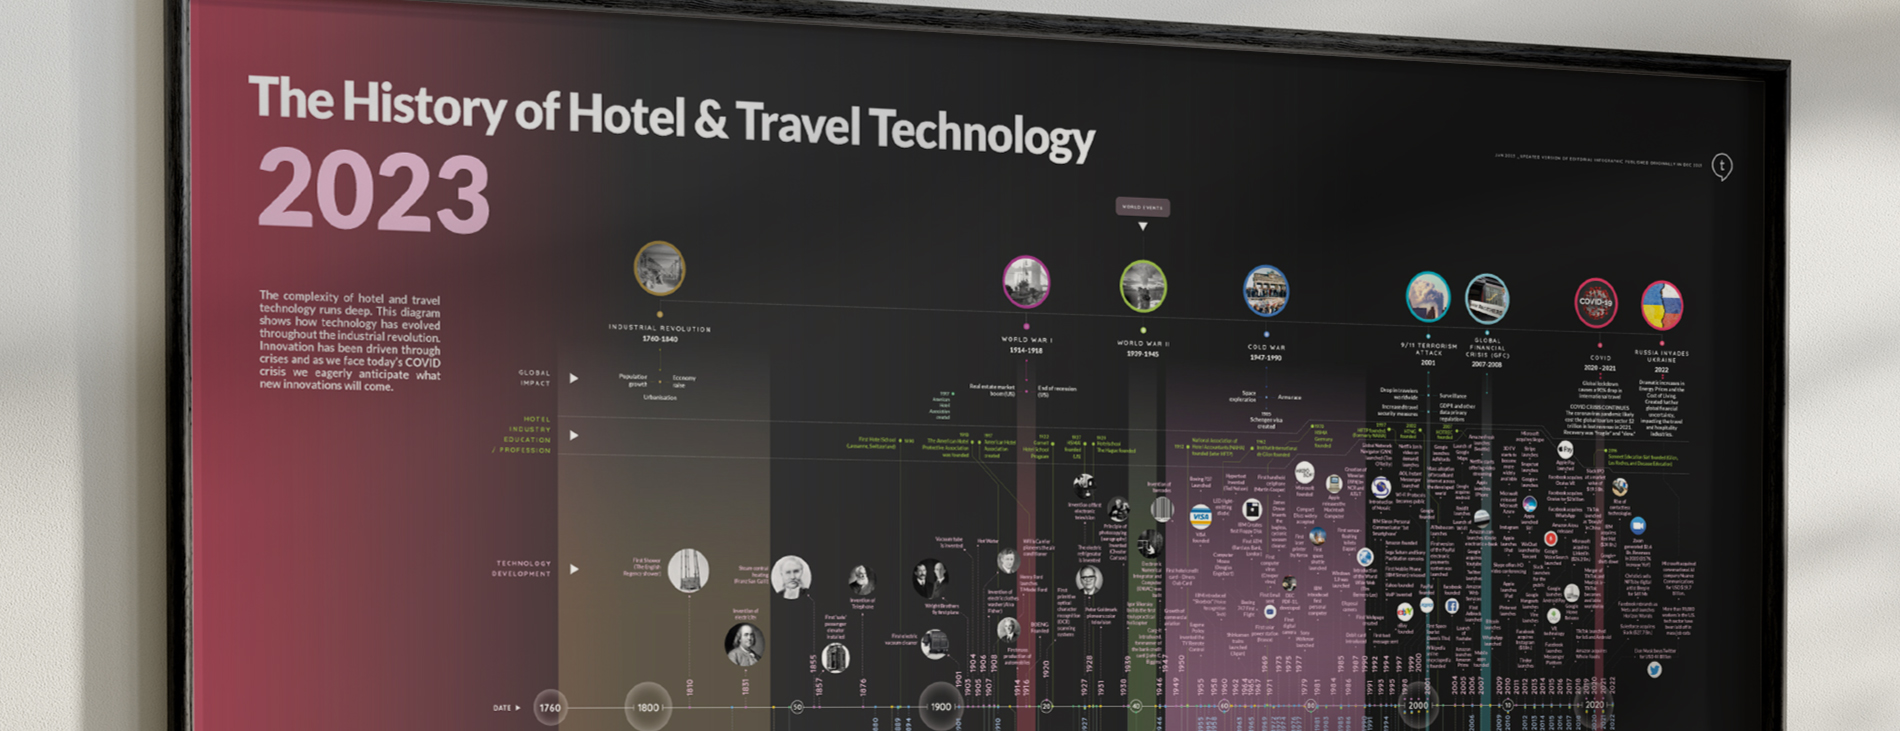 Timeline Infographic - Visual History of the evolution of Hospitality, Hotel and Travel Technology 